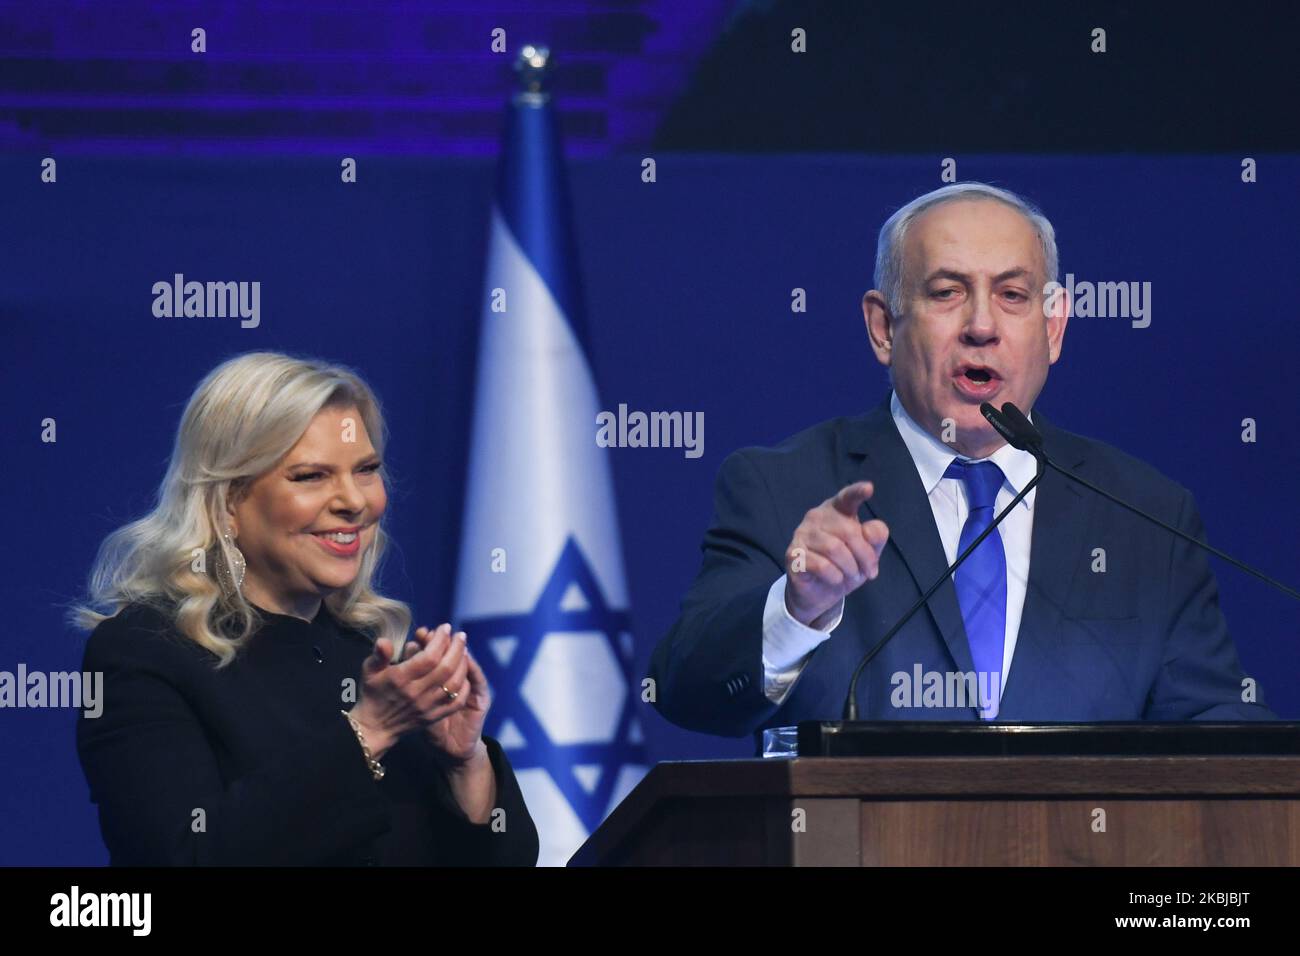 Israeli Prime Minister Benjamin Netanyahu stands next to his wife Sara as he speaks to supporters following the announcement of exit polls in Israel's election at his Likud party headquarters in Tel Aviv. On Tuesday, March 3, 2020, in Tel Aviv, Israel. (Photo by Artur Widak/NurPhoto) Stock Photo